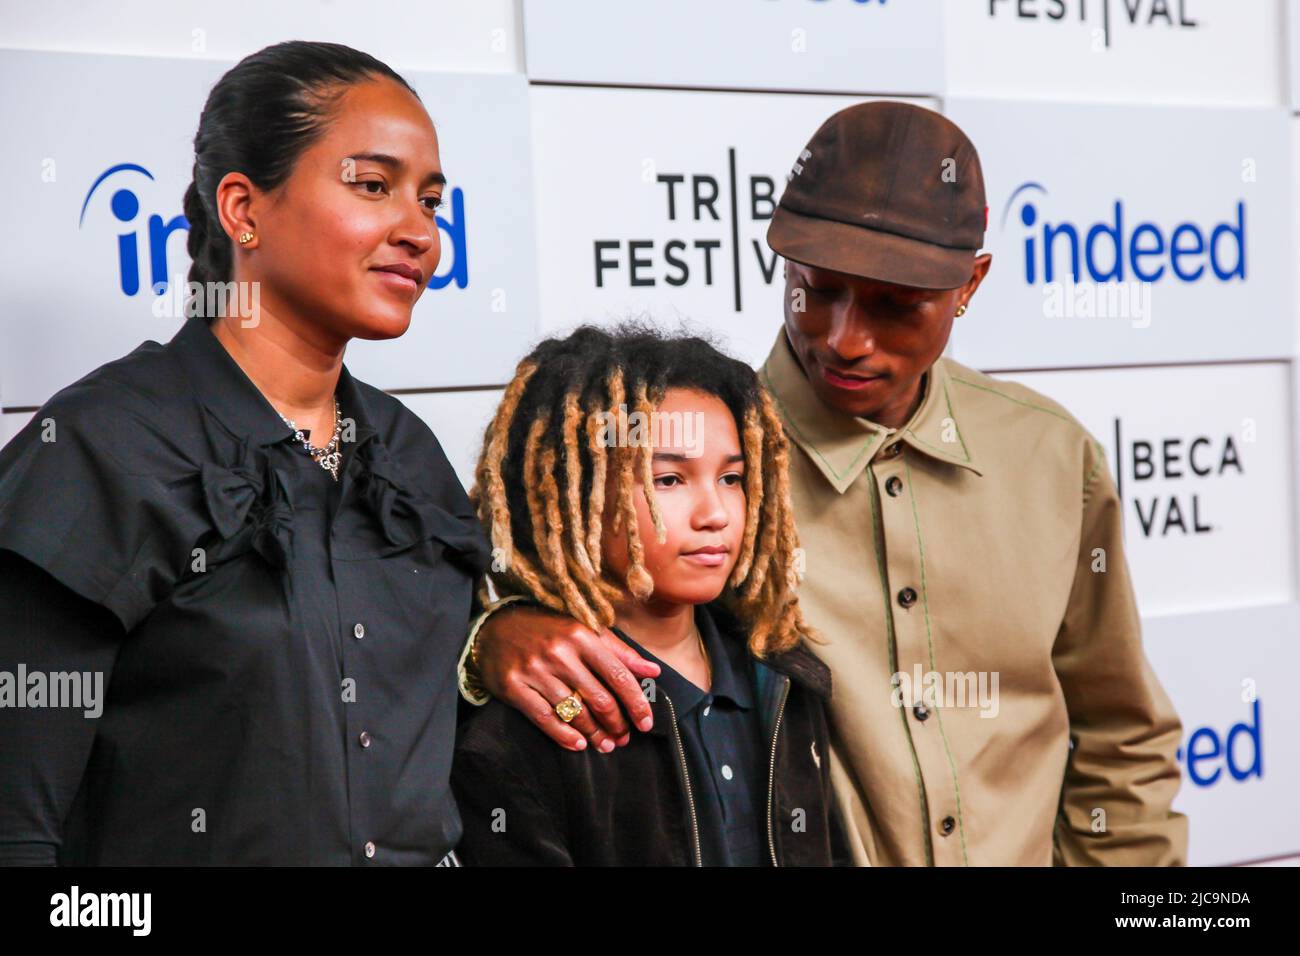 Pharrell Williams honored with a star on the Hollywood Walk of Fame  Featuring: Pharrell Williams,Helen Lasichanh,Rocket Ayer Williams,Family  Where: Hollywood, California, United States When: 04 Dec 2014 Credit:  FayesVision/WENN.com Stock Photo 